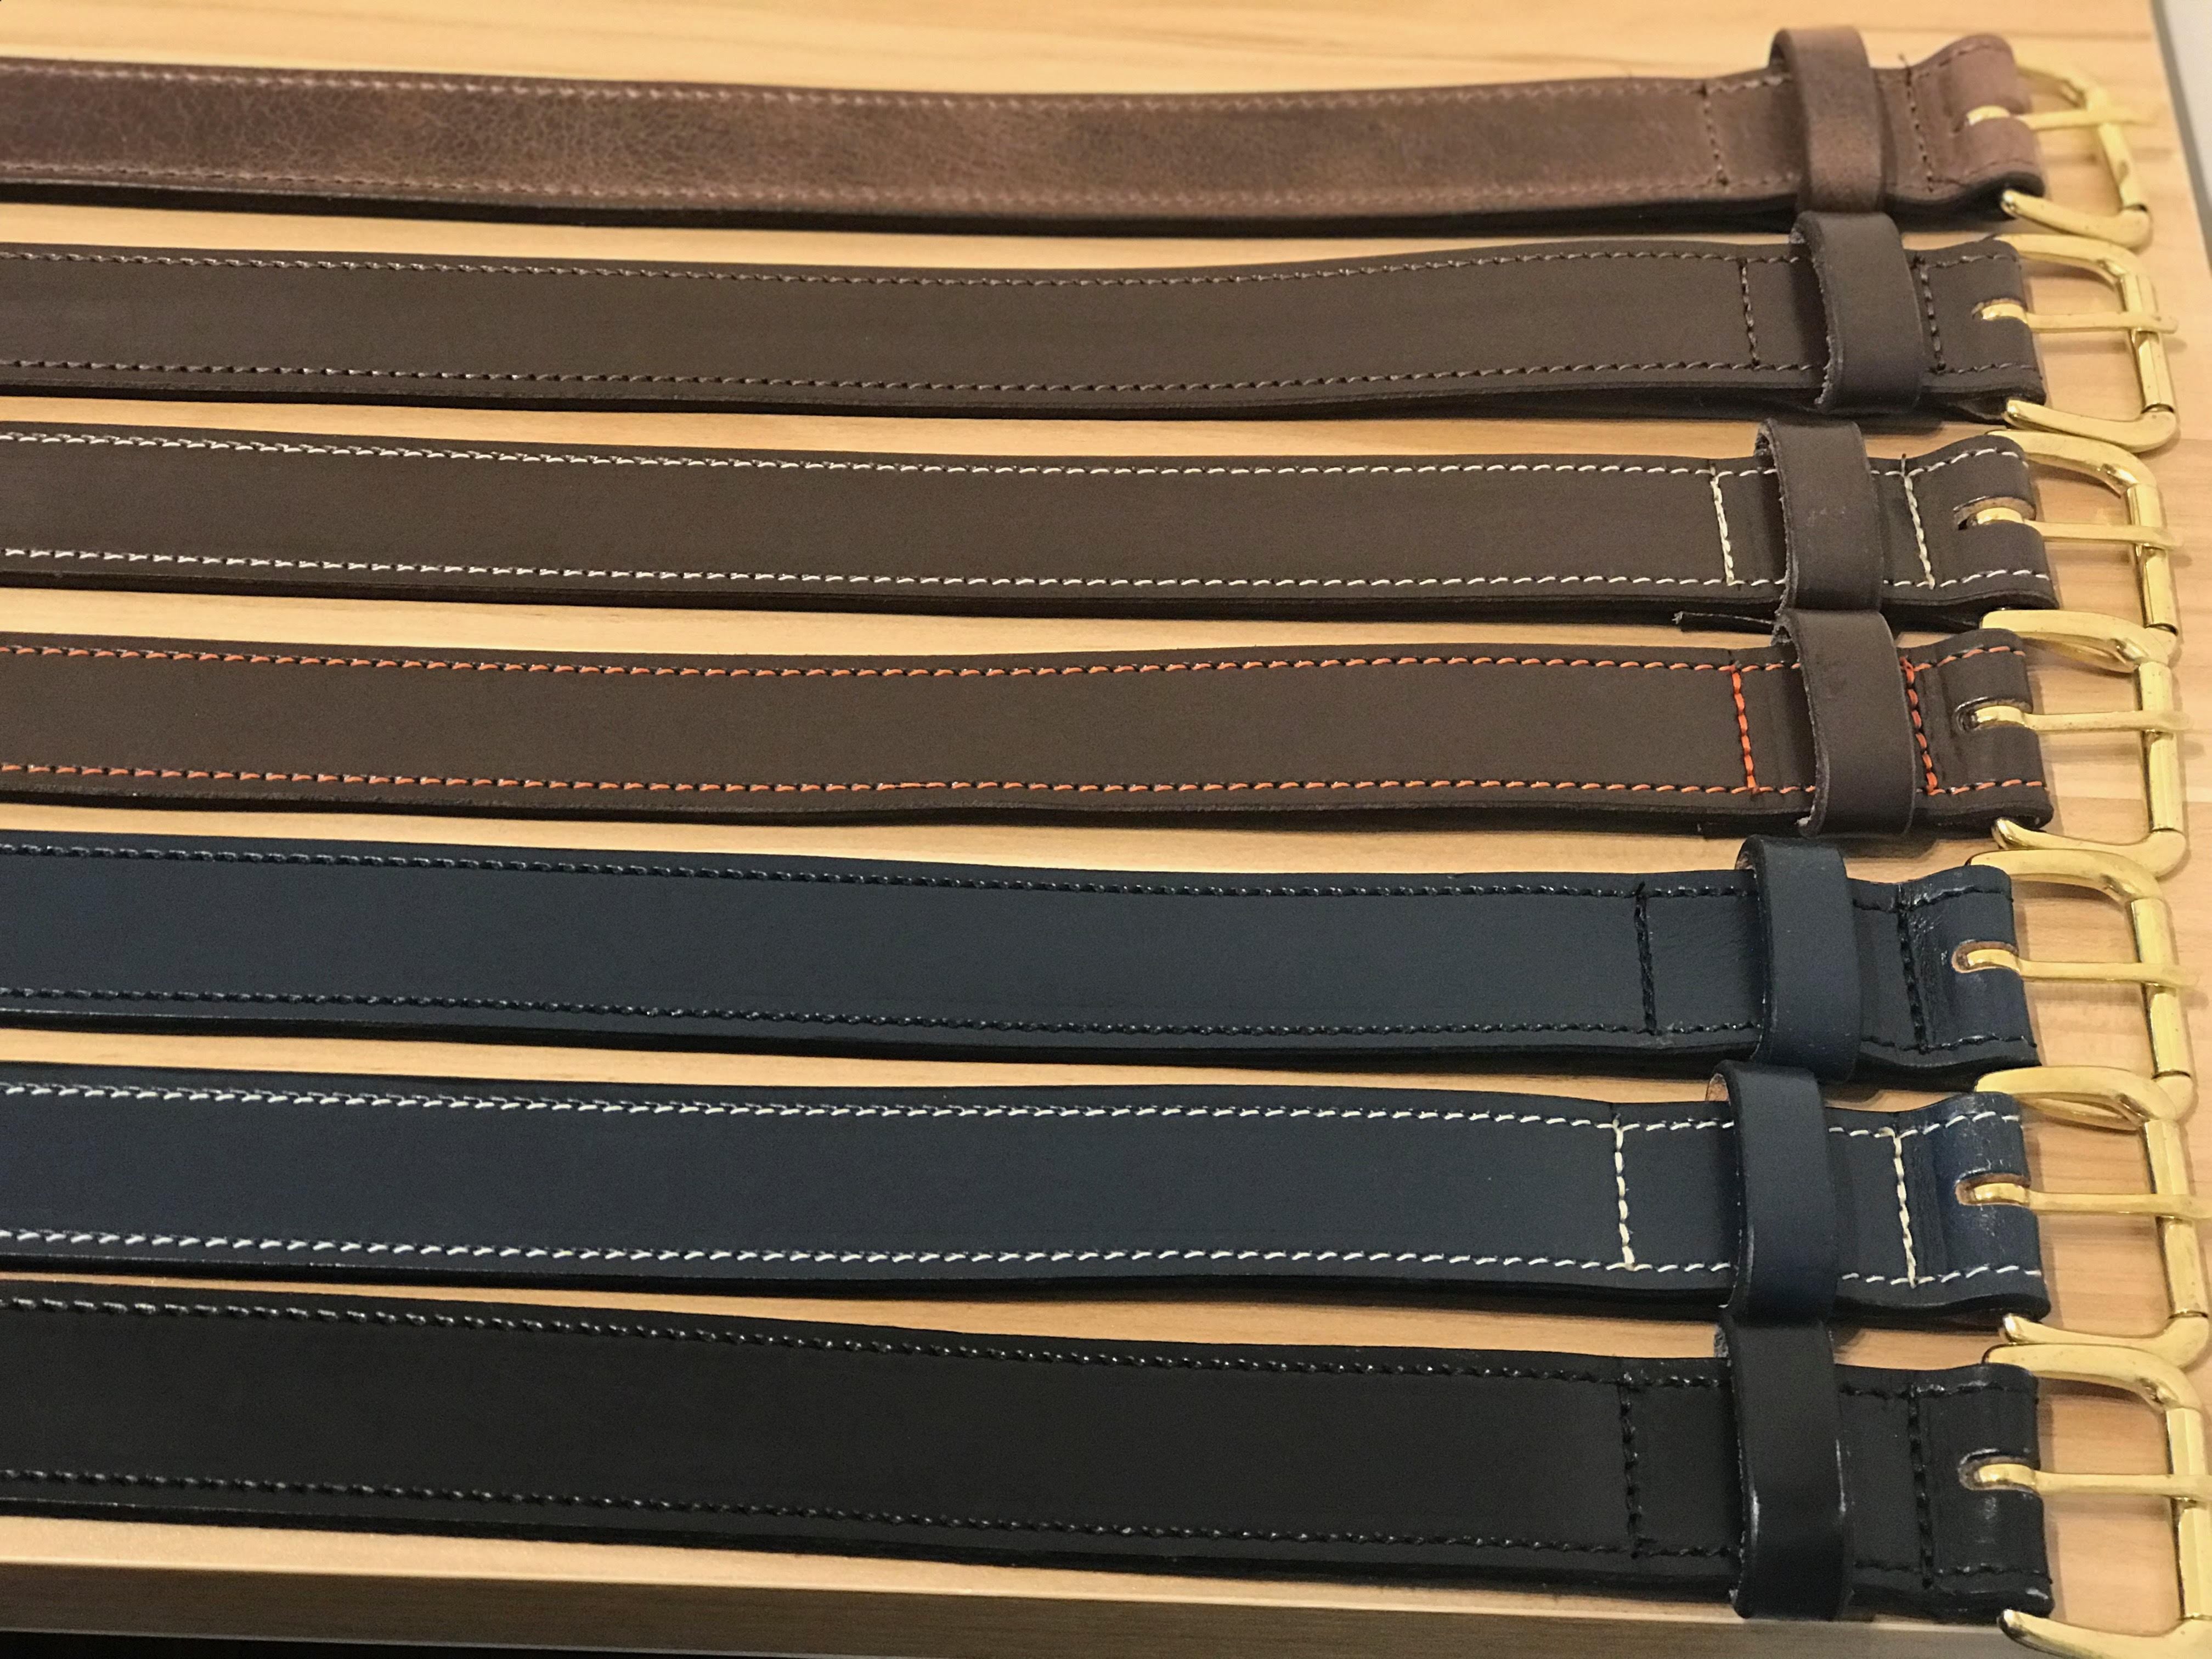 Walsall Premium Padded Bridle Leather Guitar Strap (Hand Made In England), Accessory for sale at Richards Guitars.